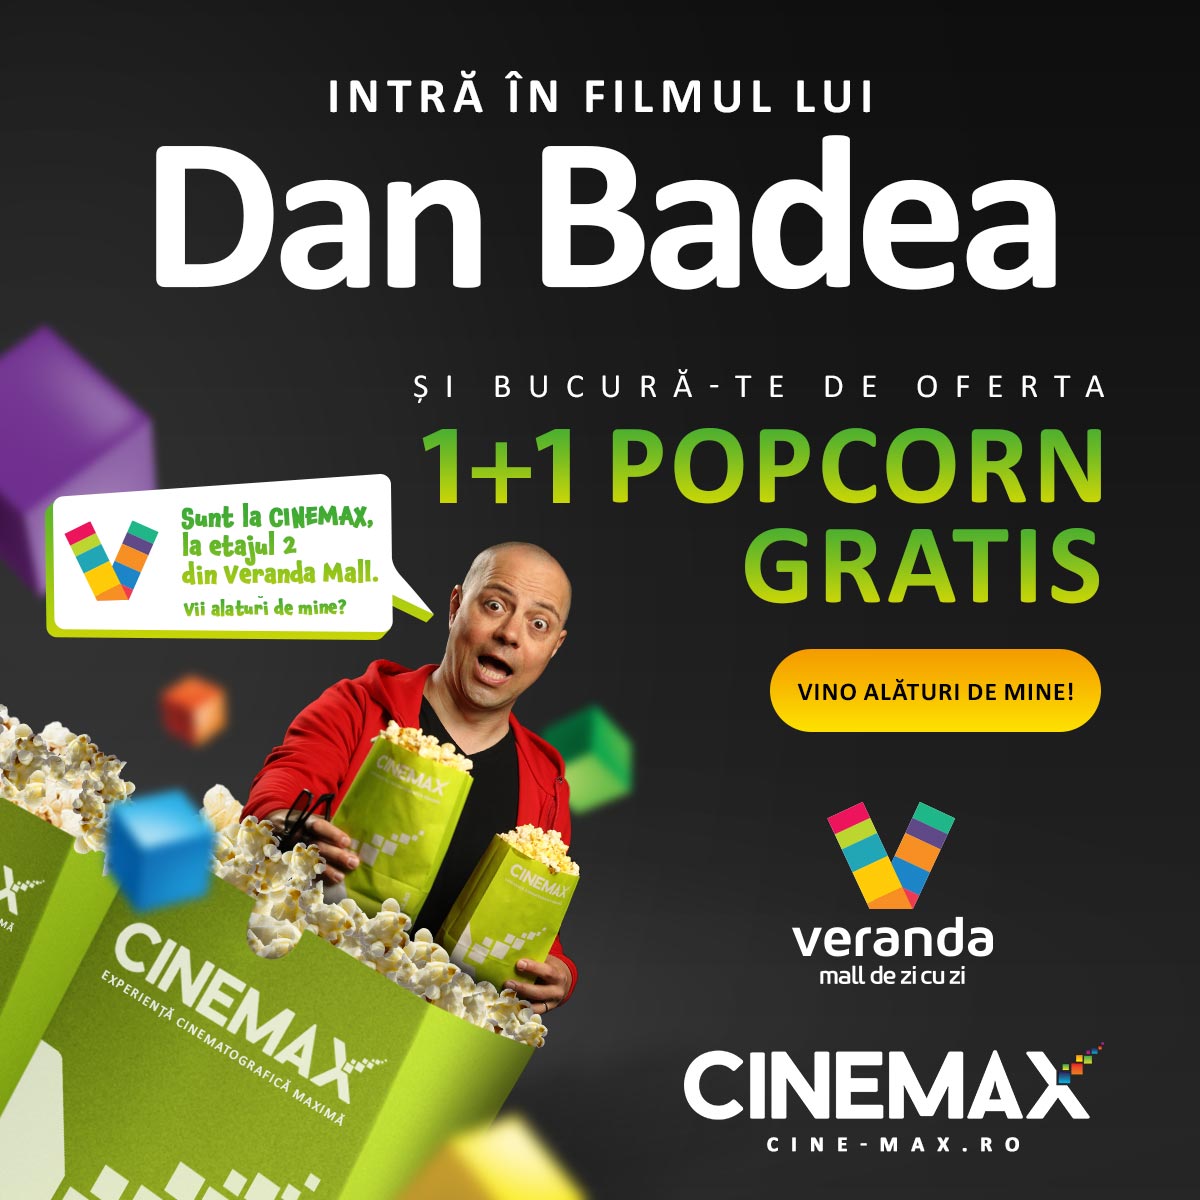 Cinemax and Dan Badea bring people out for fun with maximum movie experience and popcorn 1+1 free (press release)